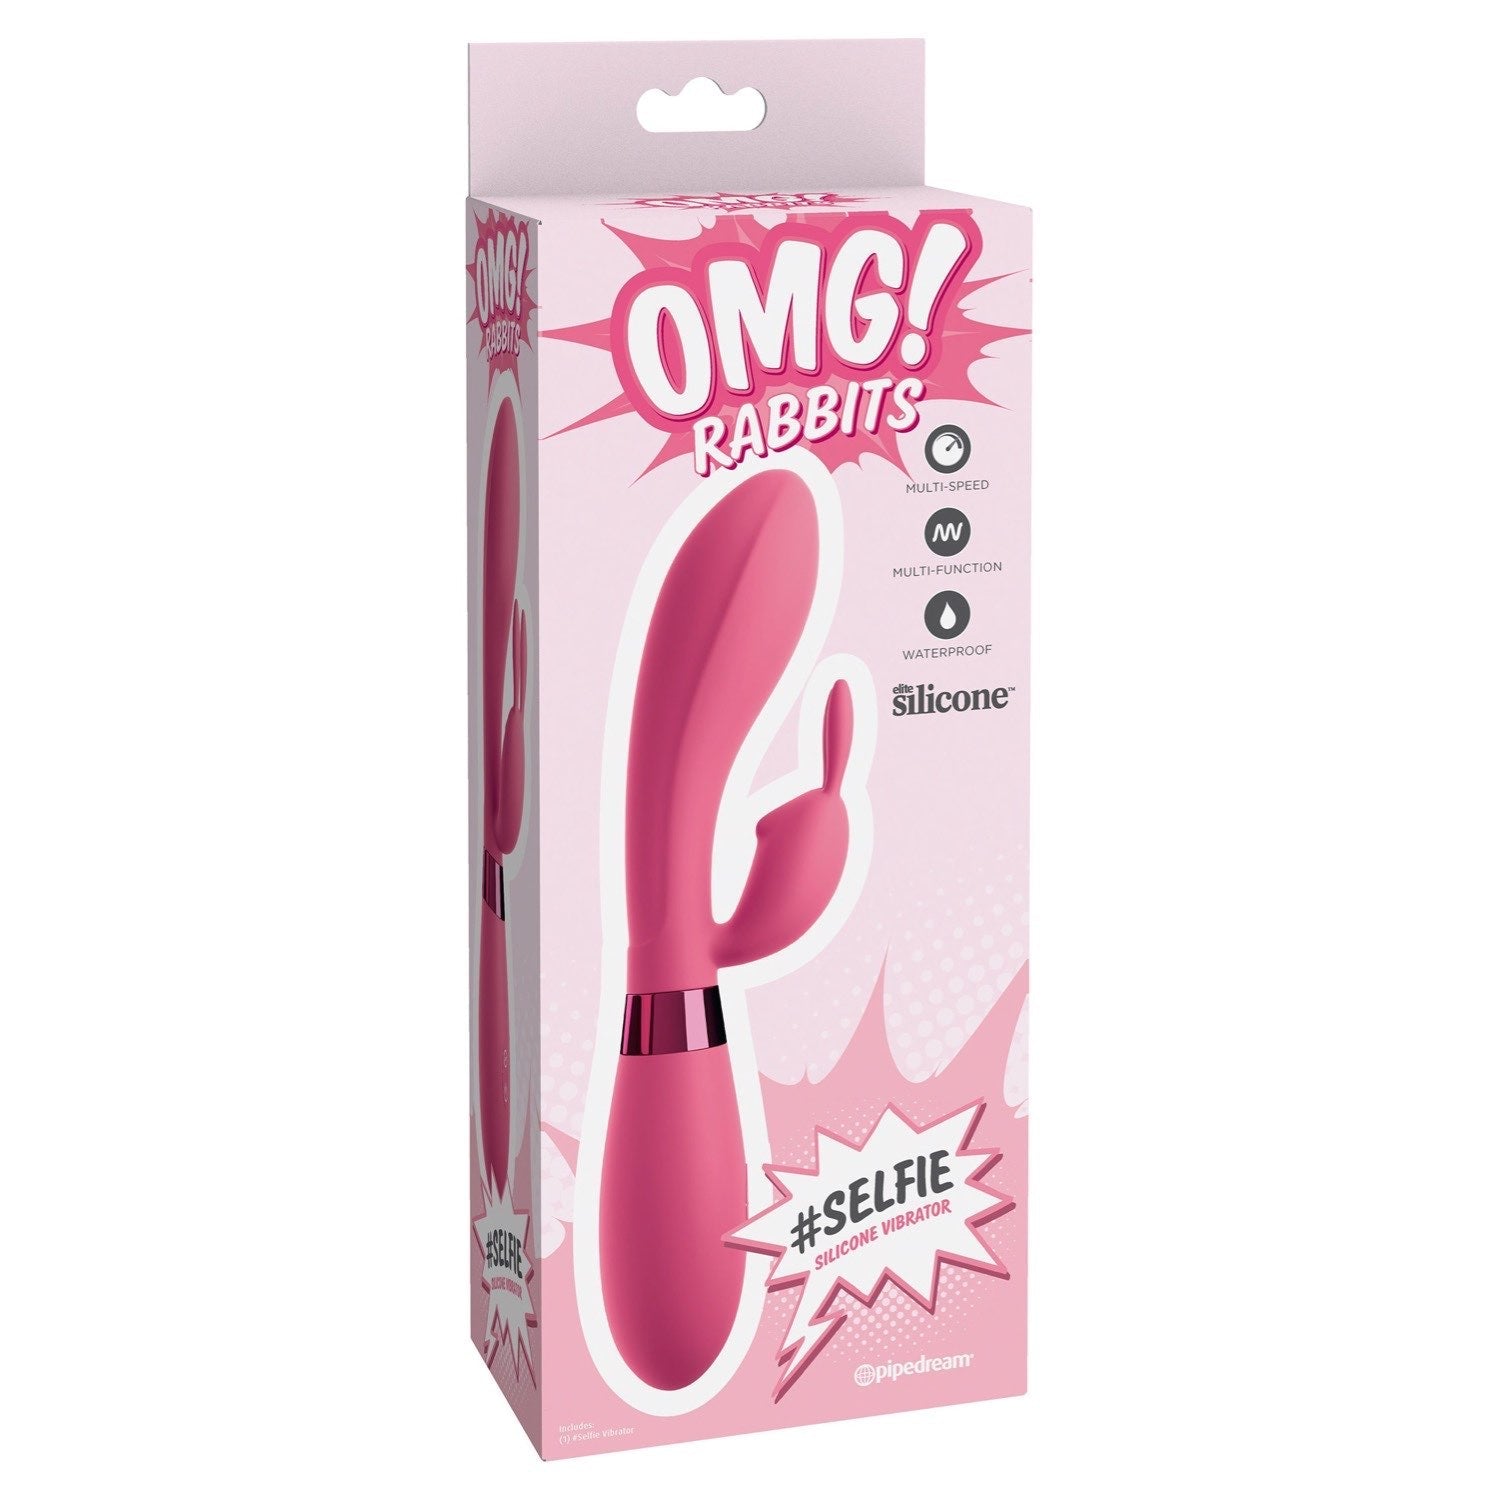 Omg! OMG! Rabbits #Selfie - Pink Rabbit Vibrator by Pipedream